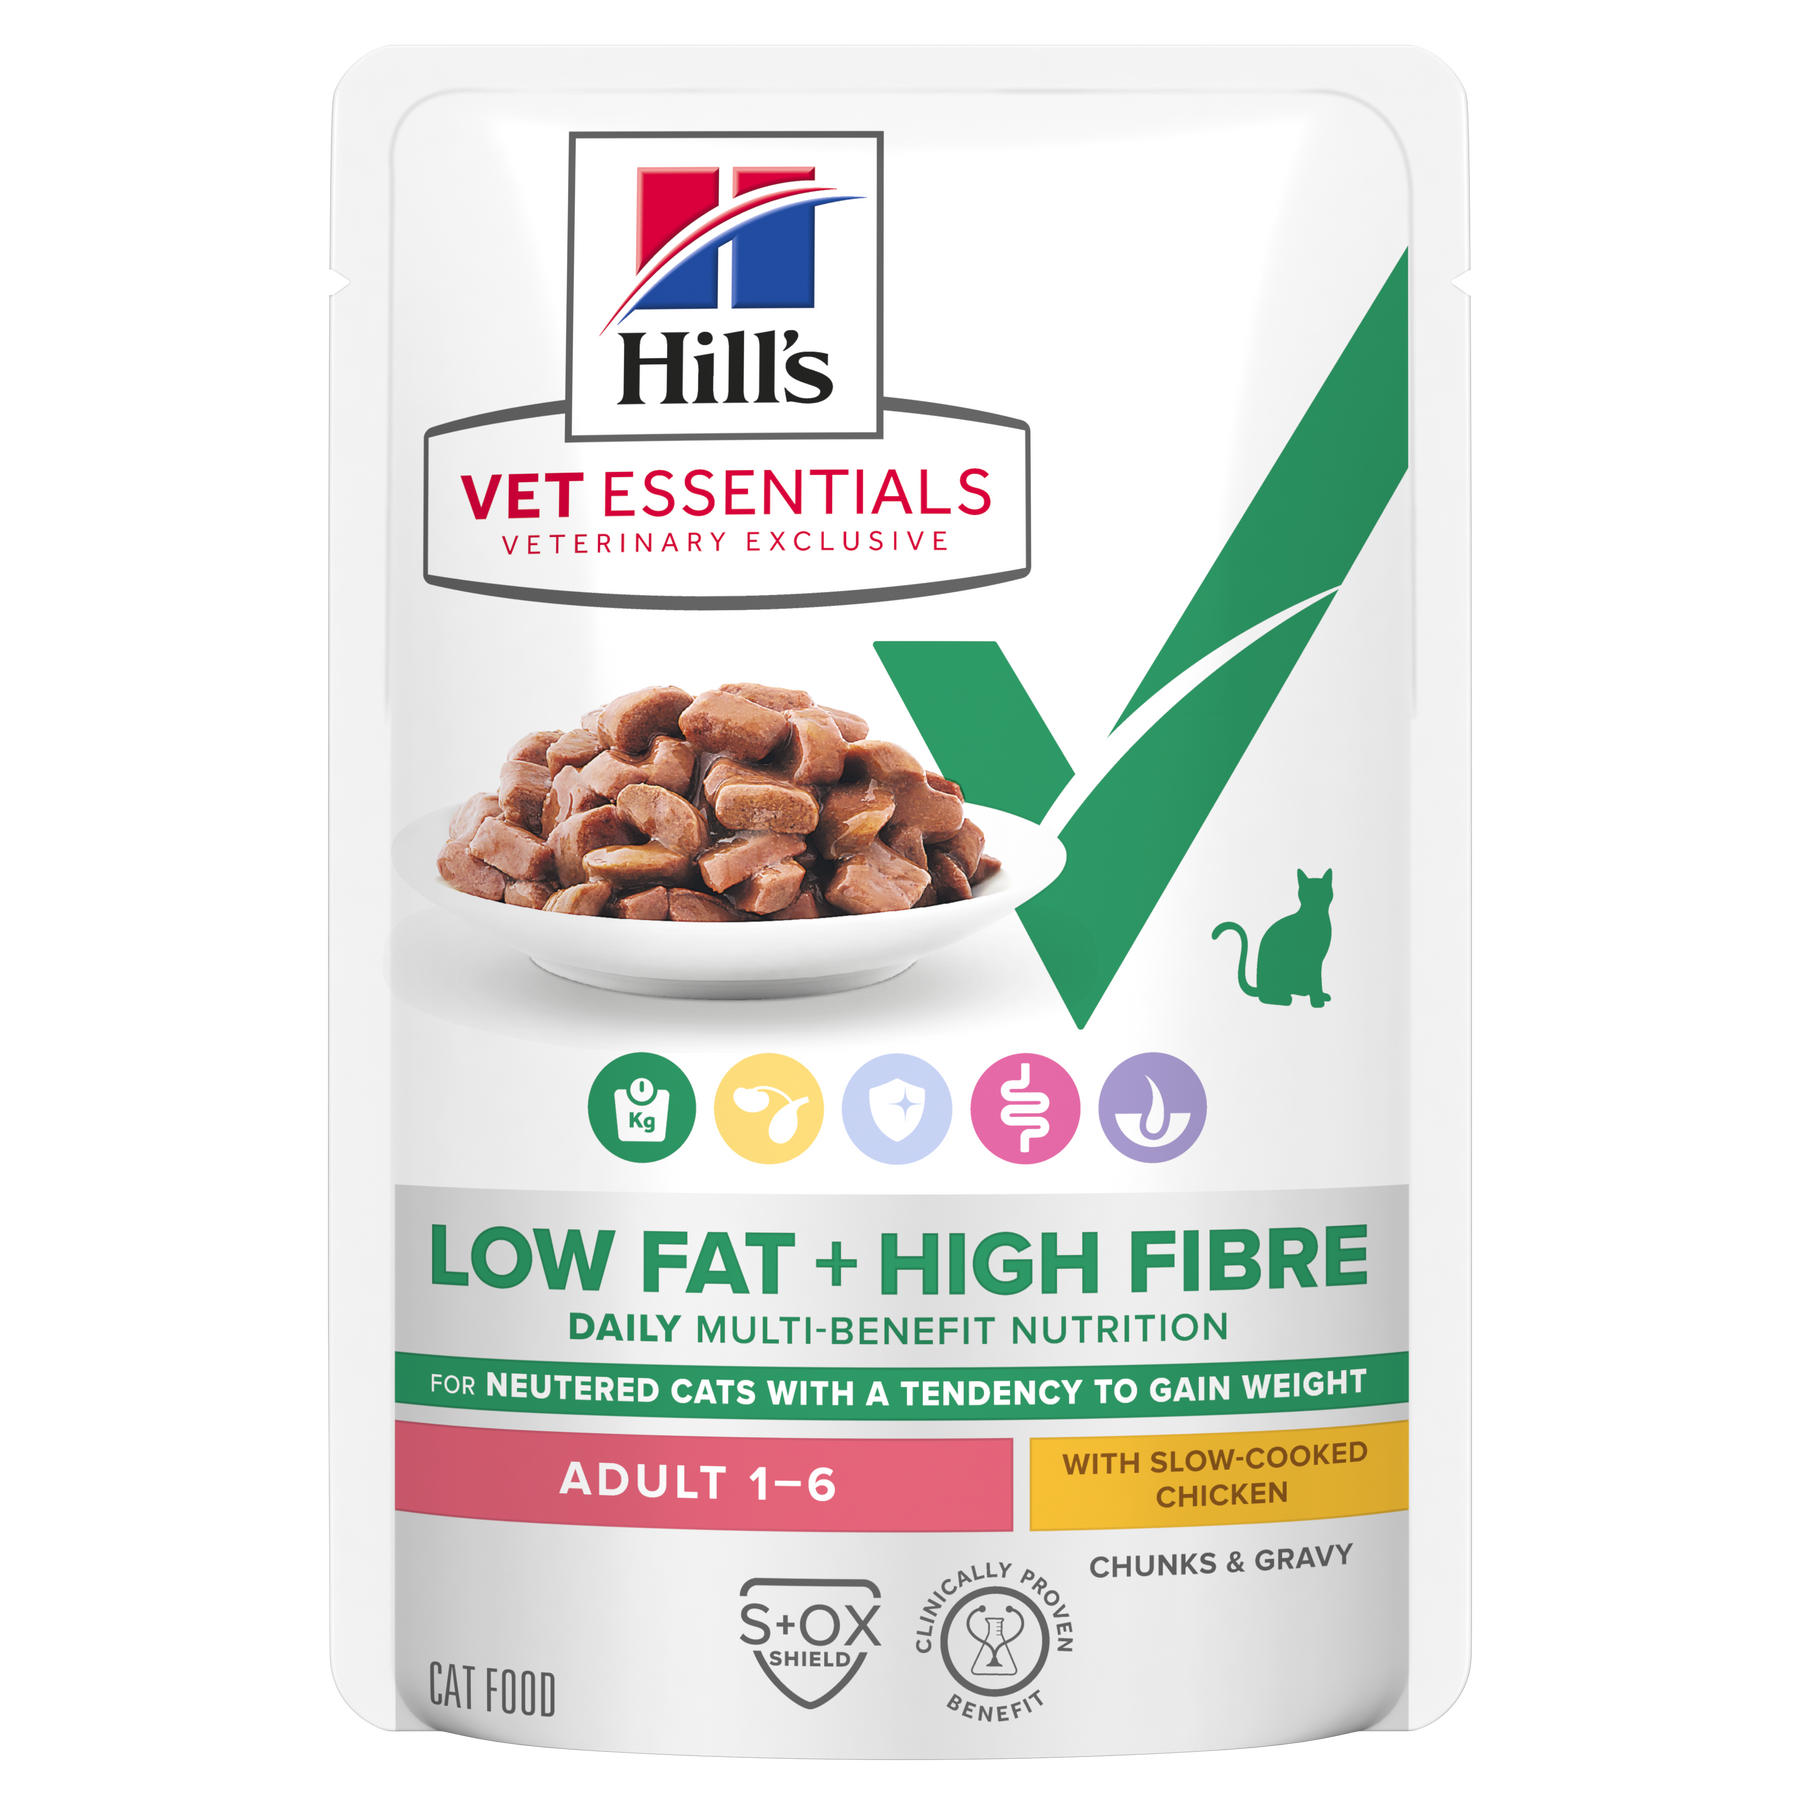 Hill's VET ESSENTIALS Low Fat + High Fibre Adult Wet Cat Food with Slow-cooked Chicken